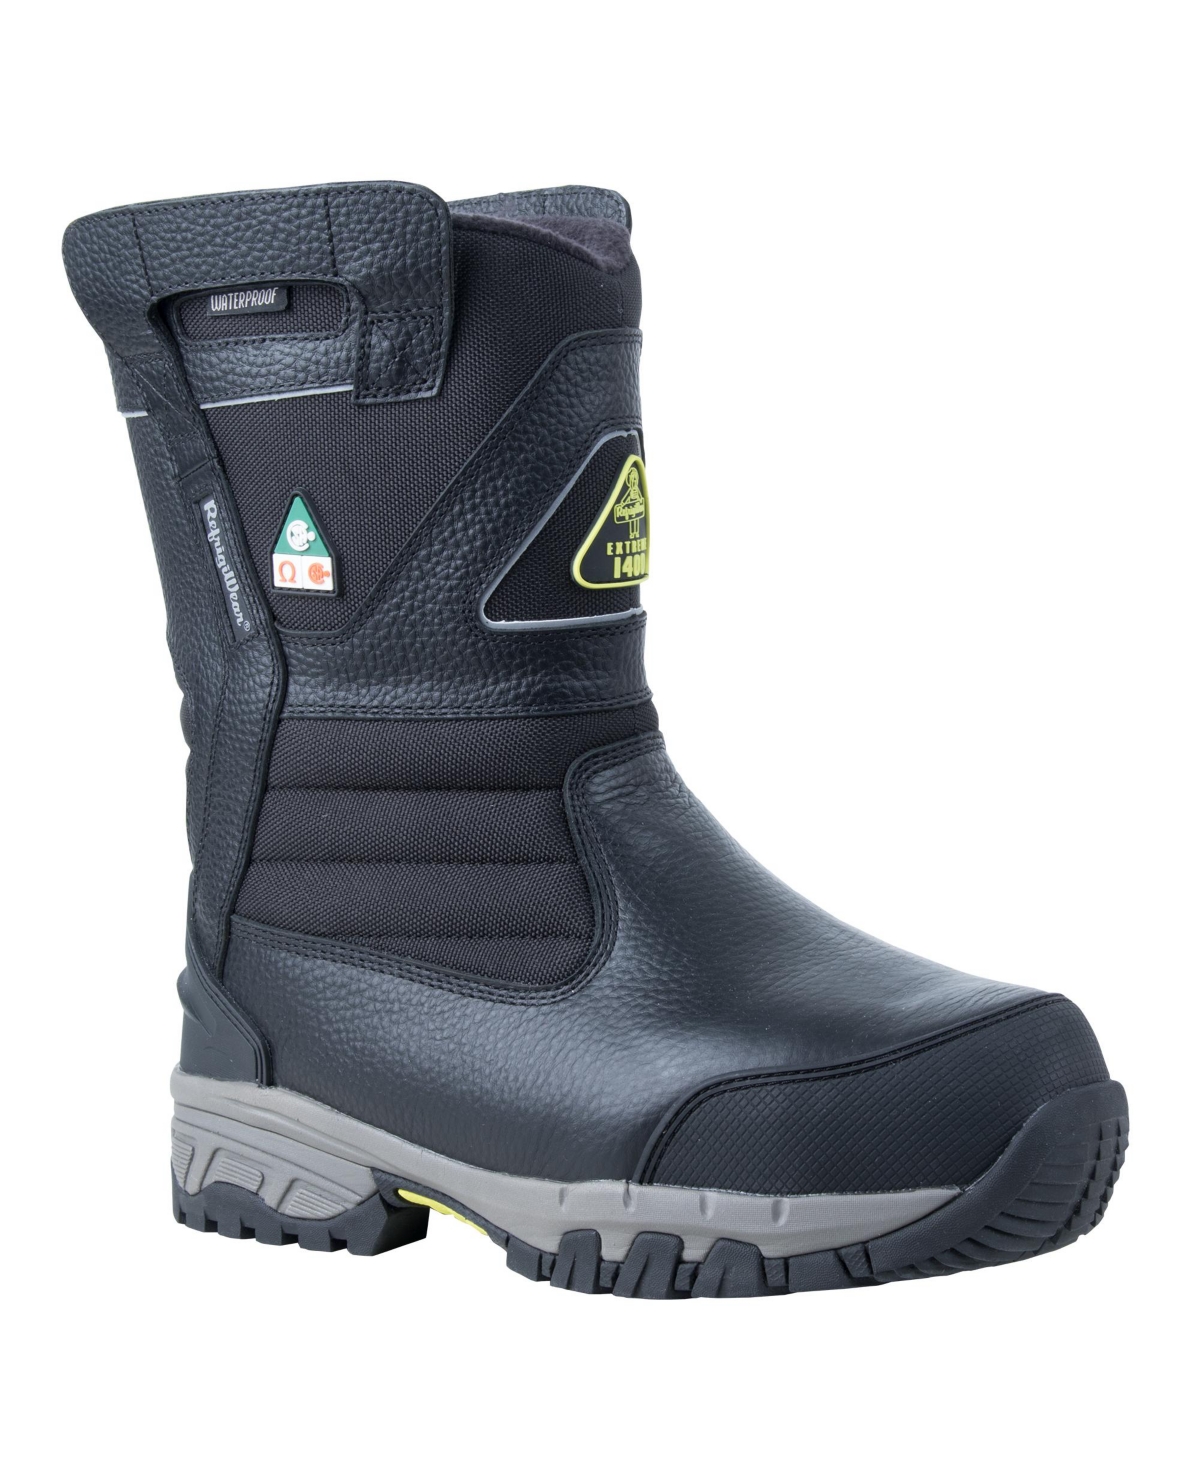 Men's Extreme Pull-On Insulated Freezer Boots - Black